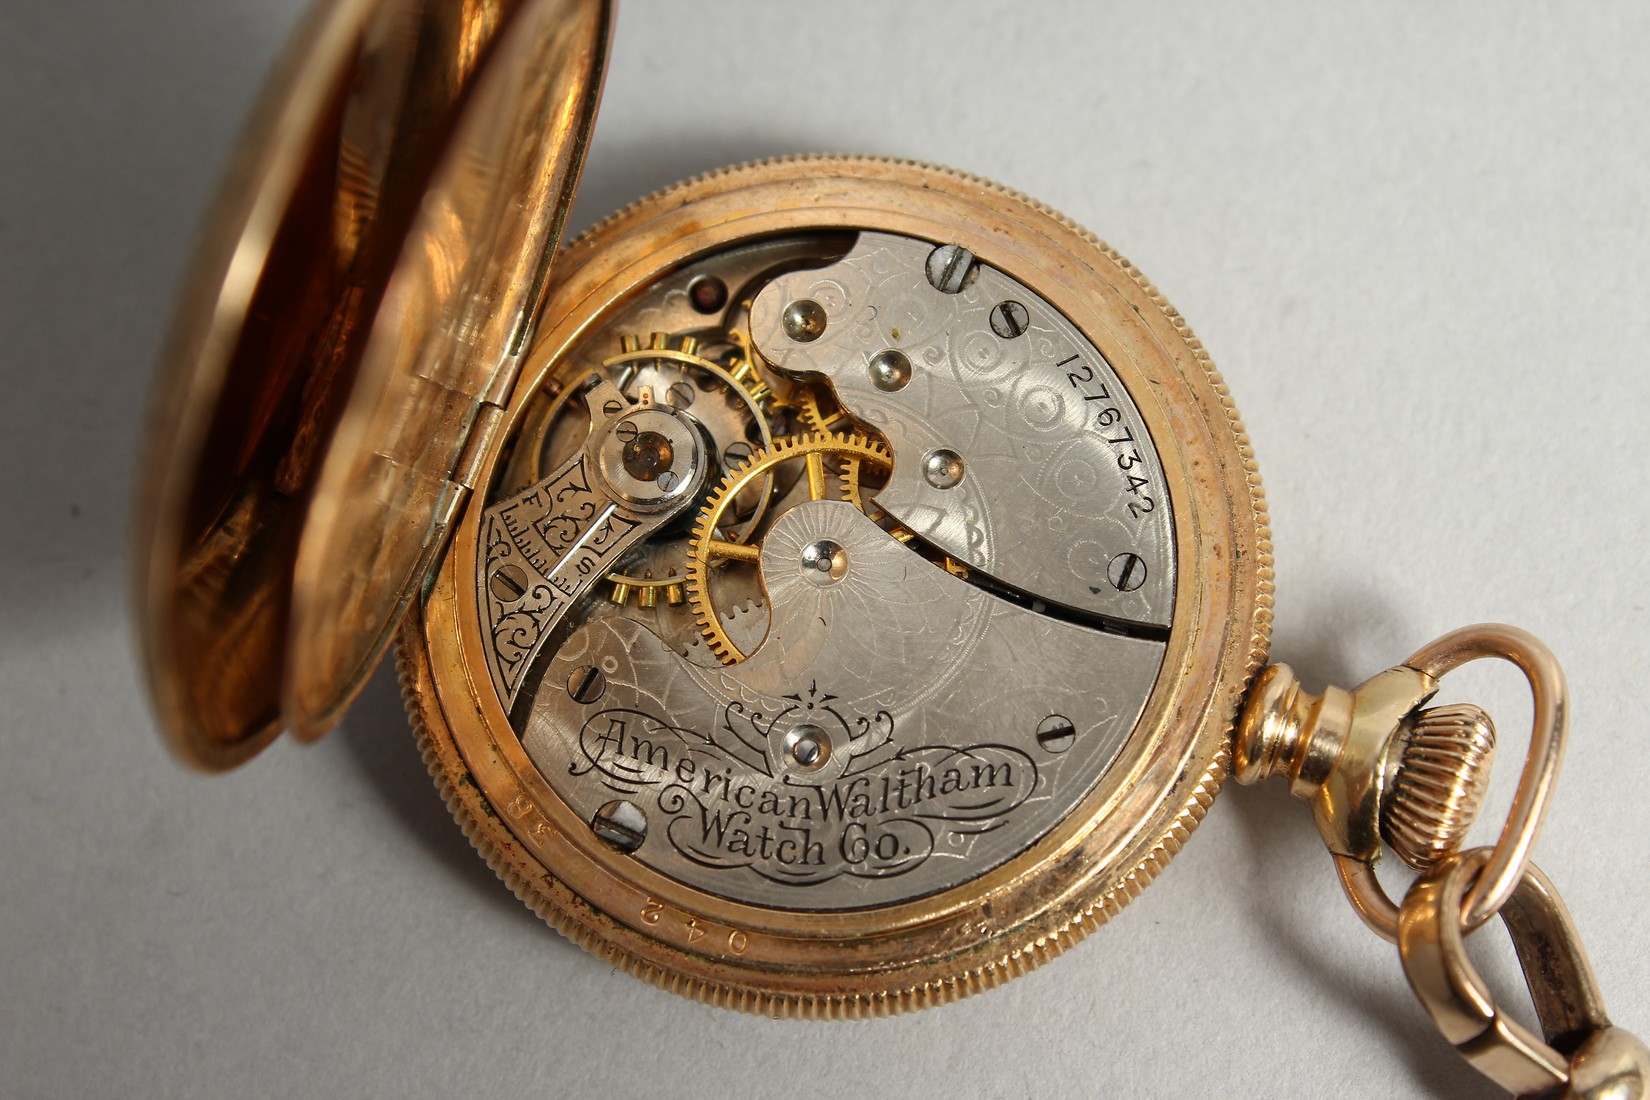 A LADIES WALTHAM DRESS WATCH AND CHAIN - Image 9 of 10